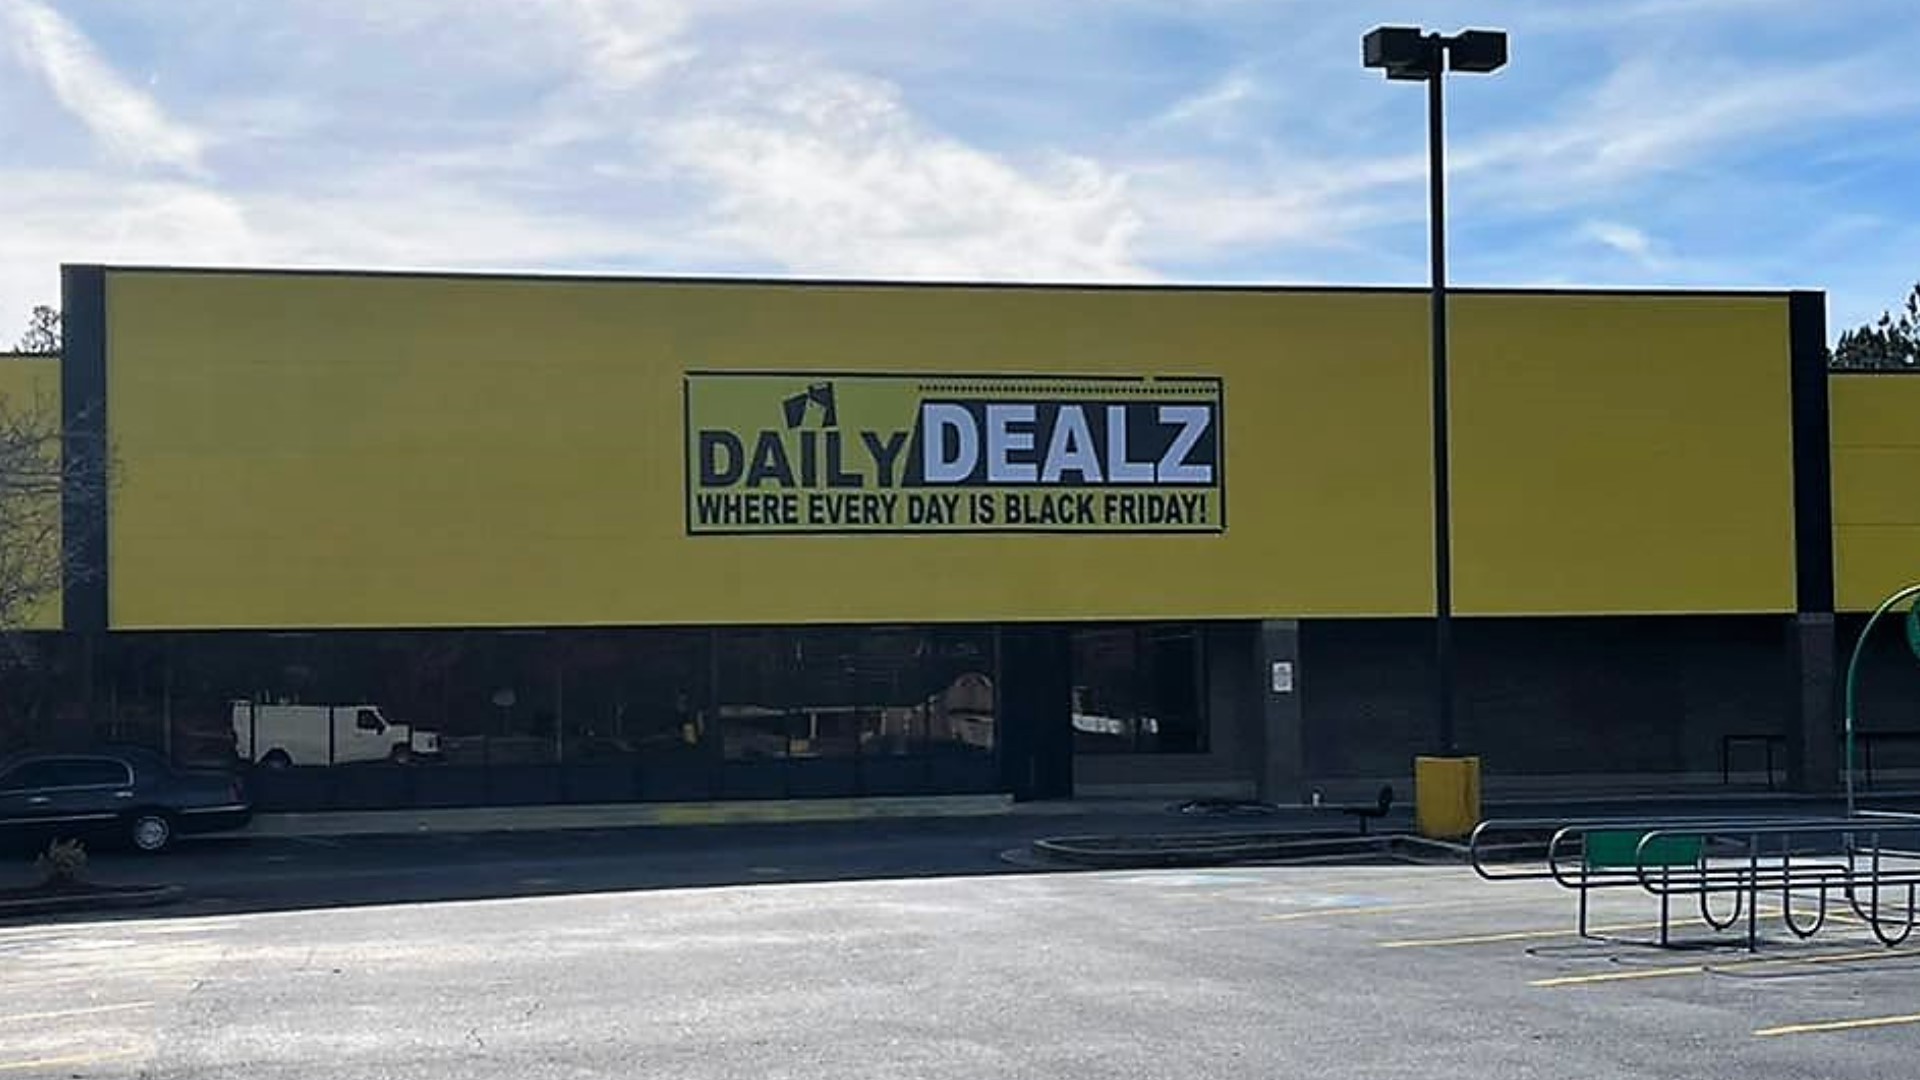 Daily Dealz buys truckloads of stuff from different large retailers like Amazon, Target, Lowe’s, Home Depot, and more for $10 and under